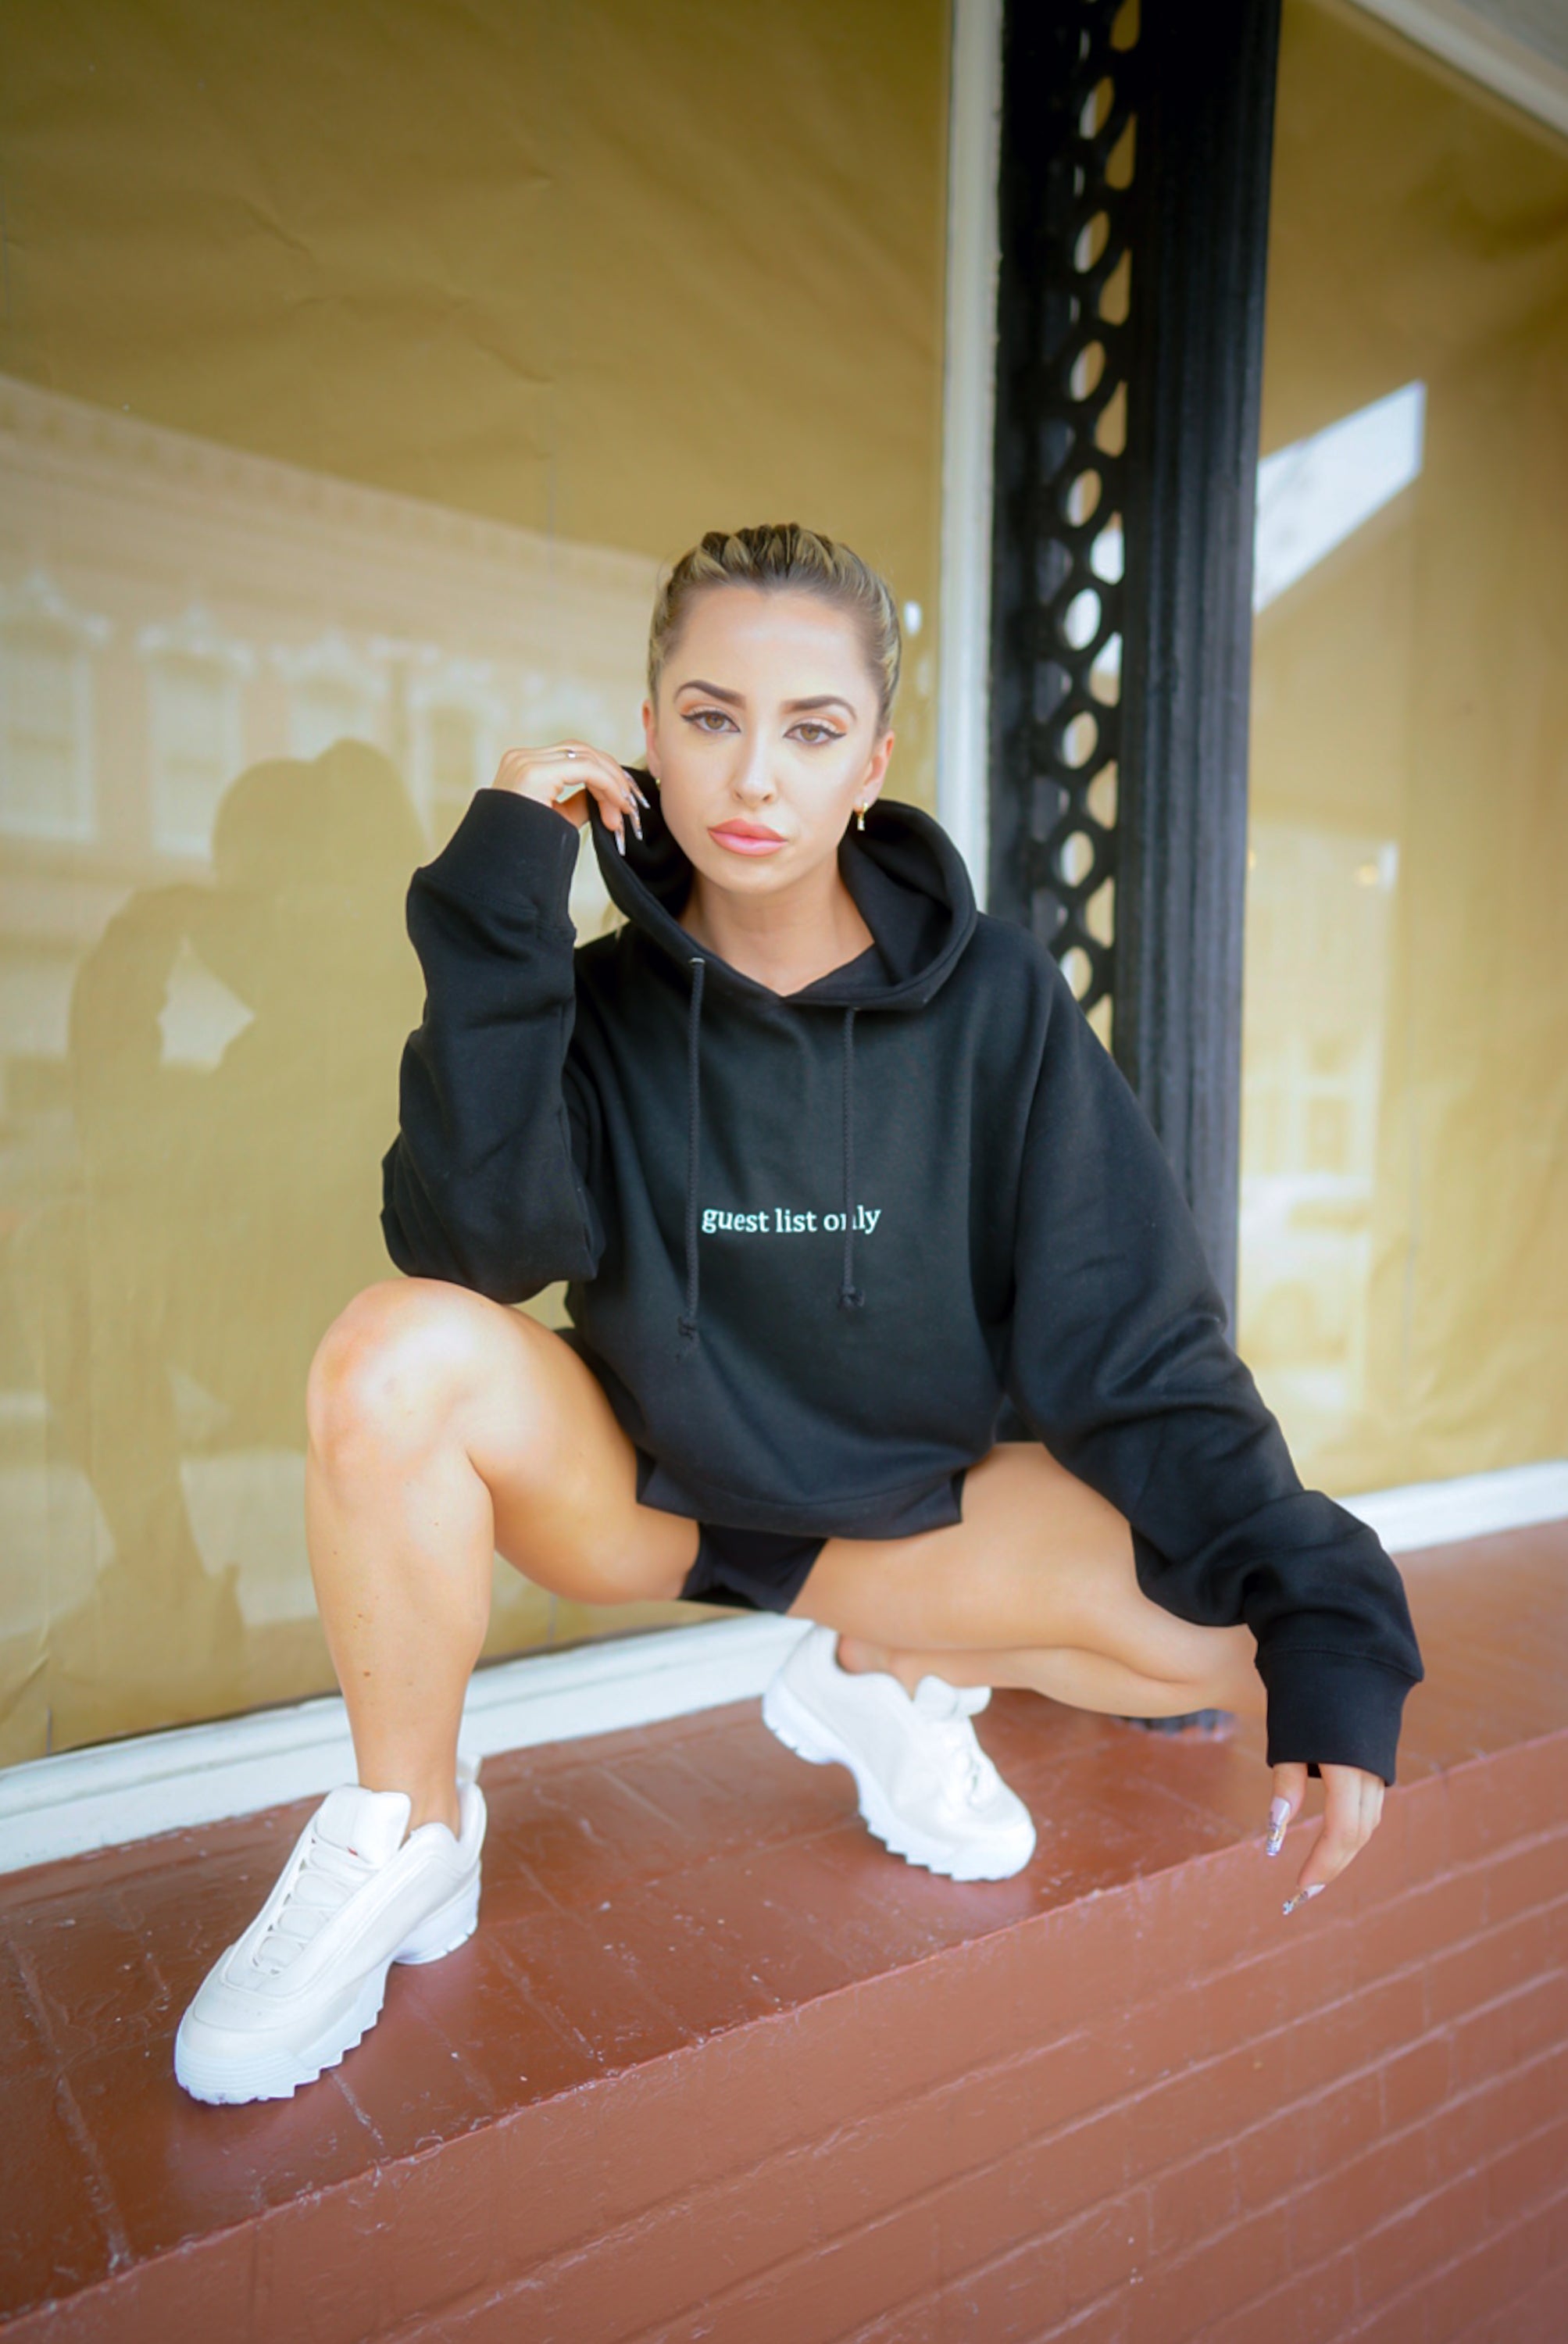 Guest List Only Hoodie